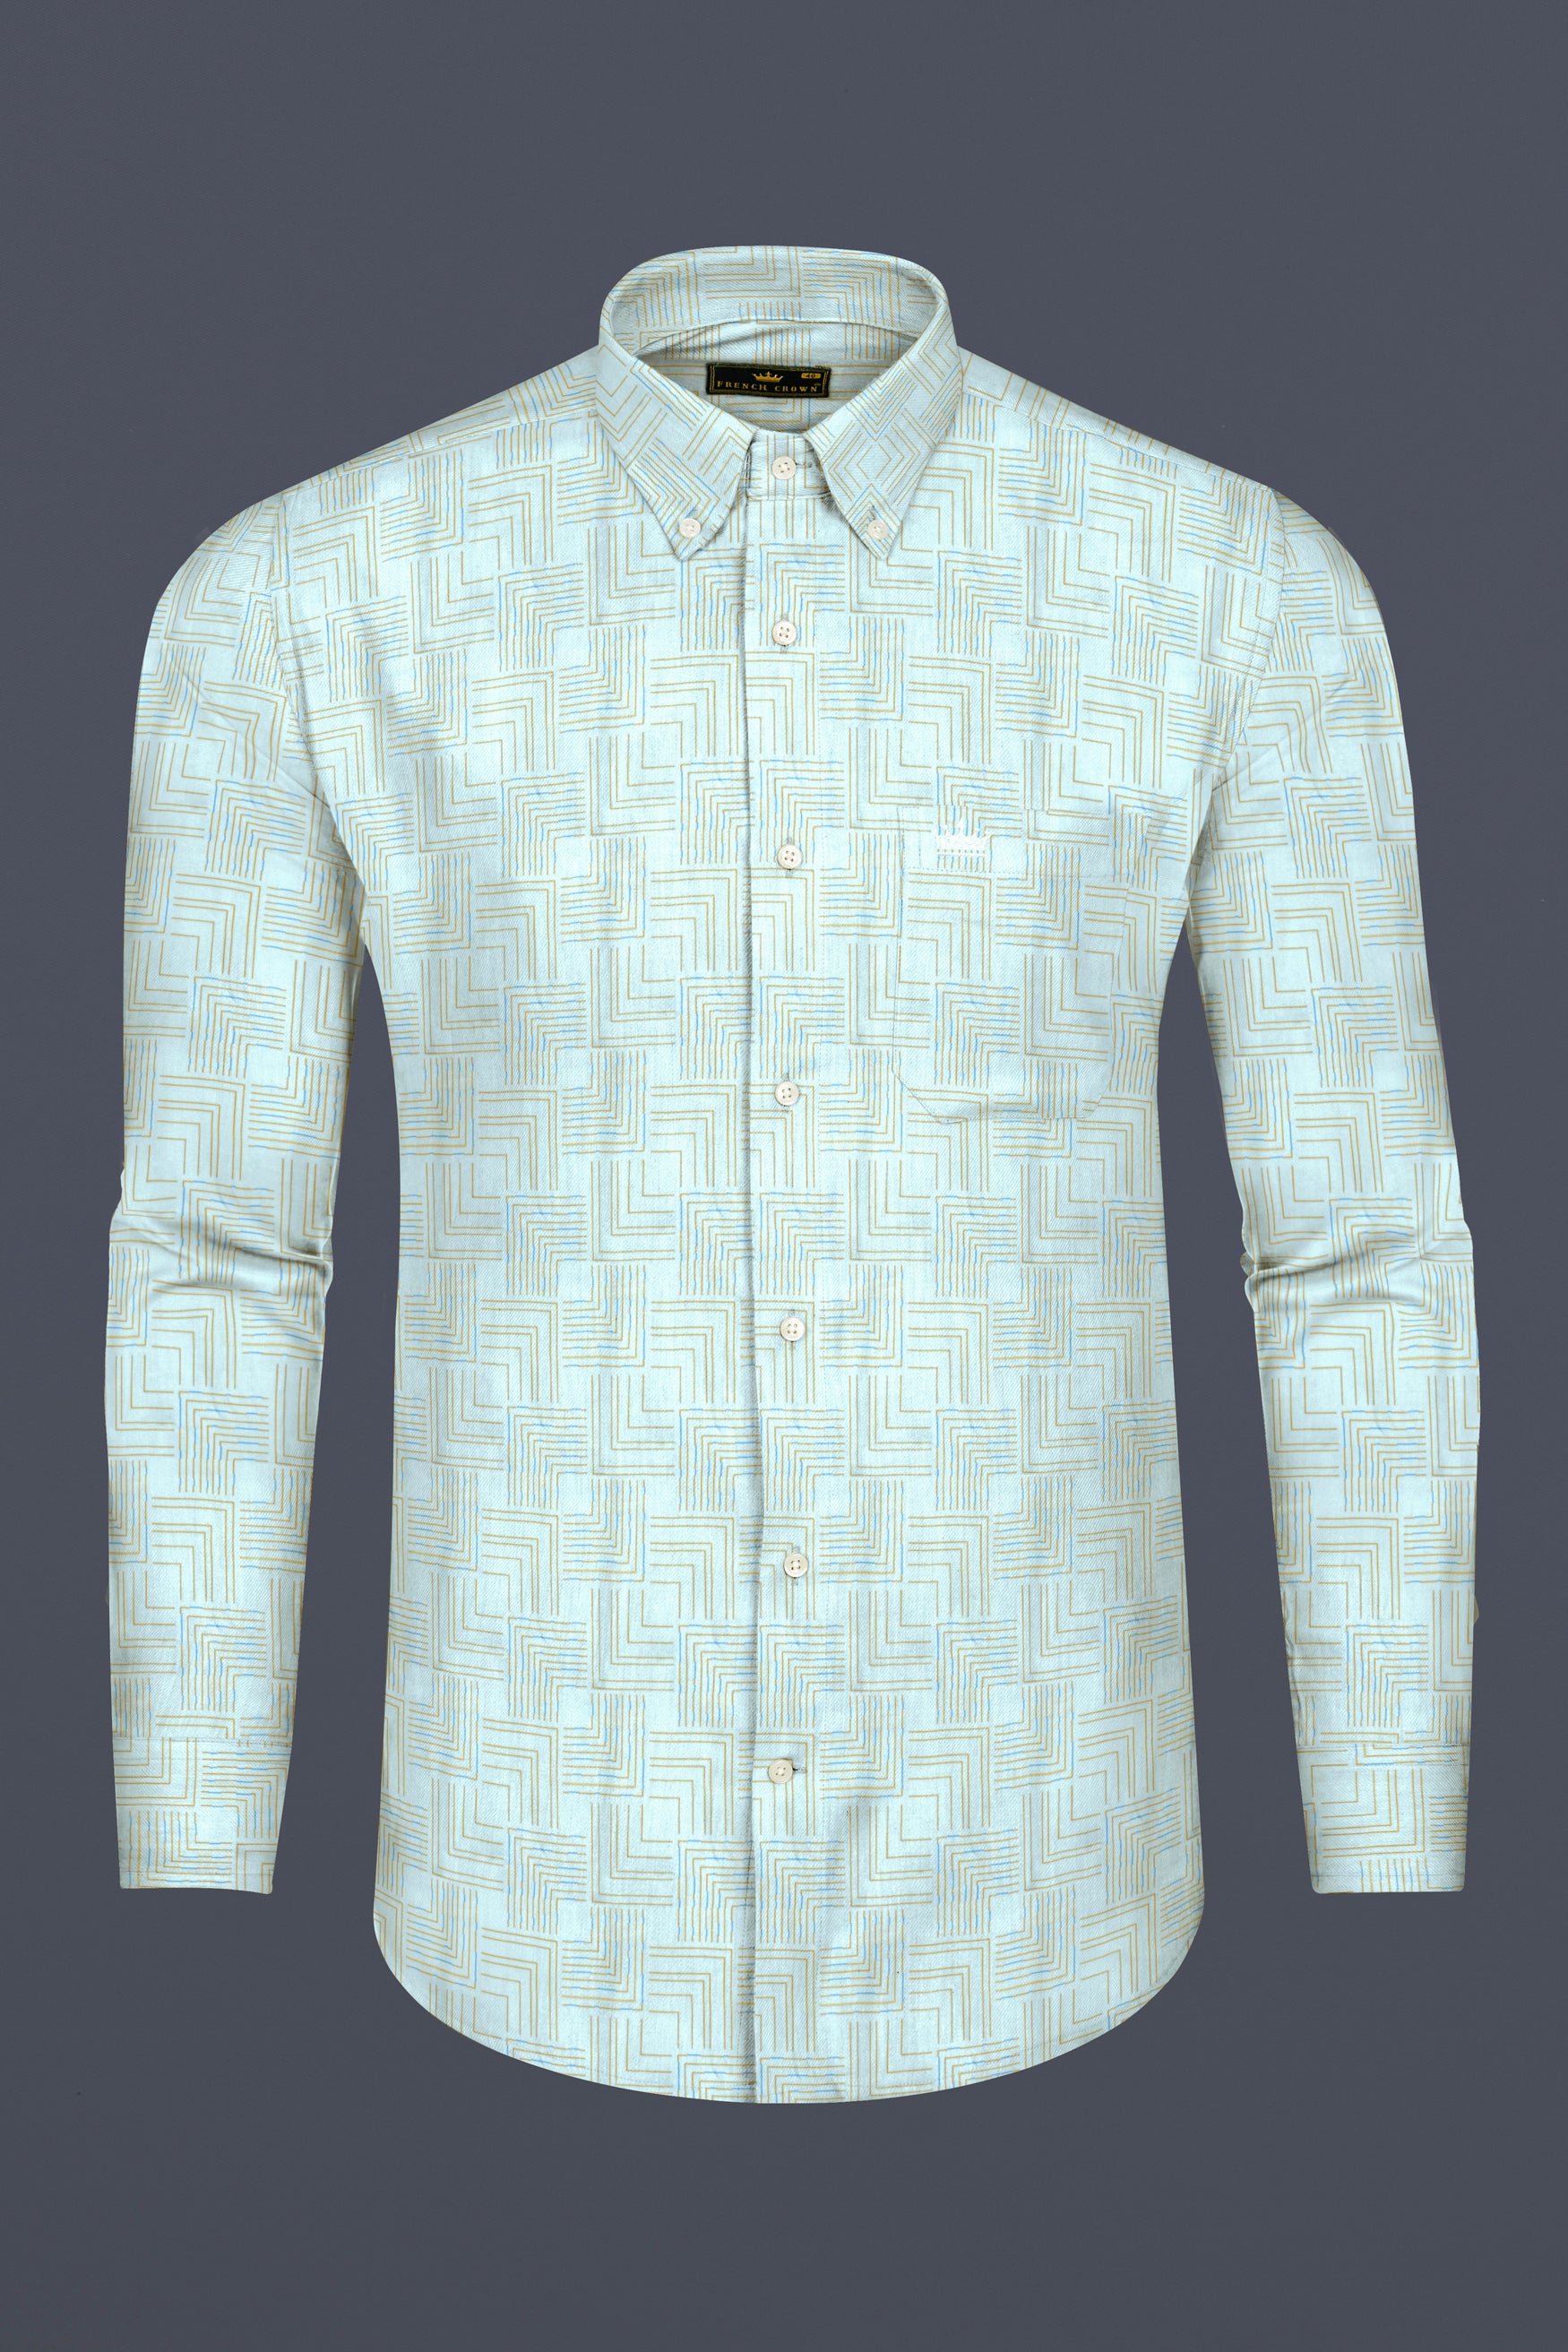 Mable Blue with Brandy Brown Abstract Lines Printed Subtle Sheen Super Soft Premium Cotton Shirt